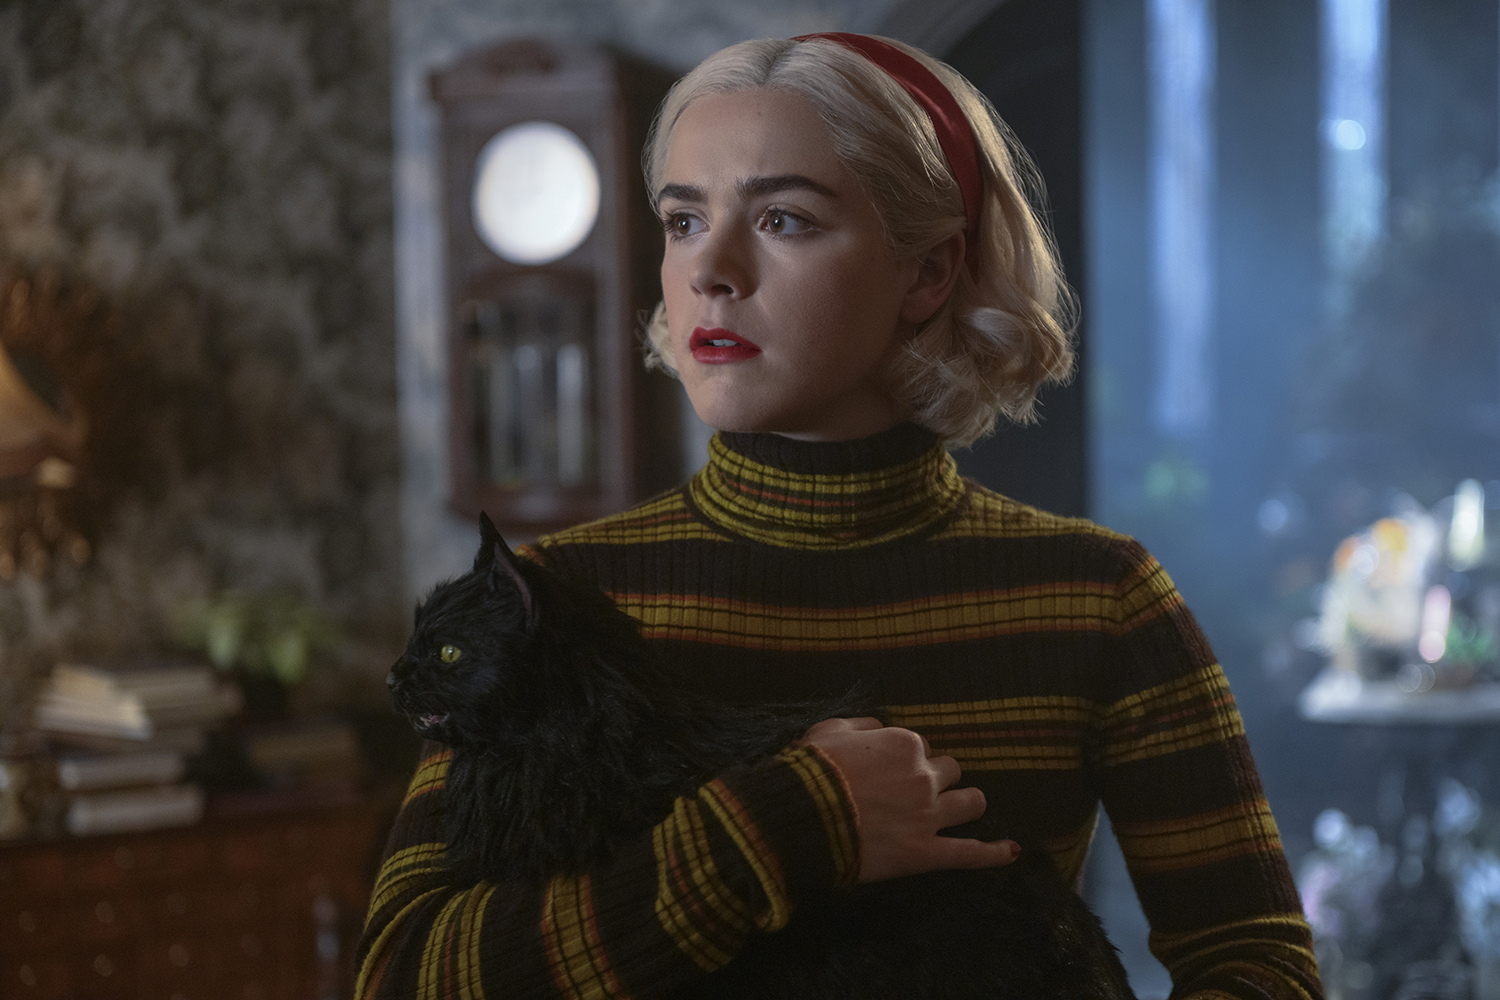 Kiernan Shipka as Sabrina Spellman in Chilling Adventures of Sabrina, which crosses over with Riverdale in season 6 episode 19